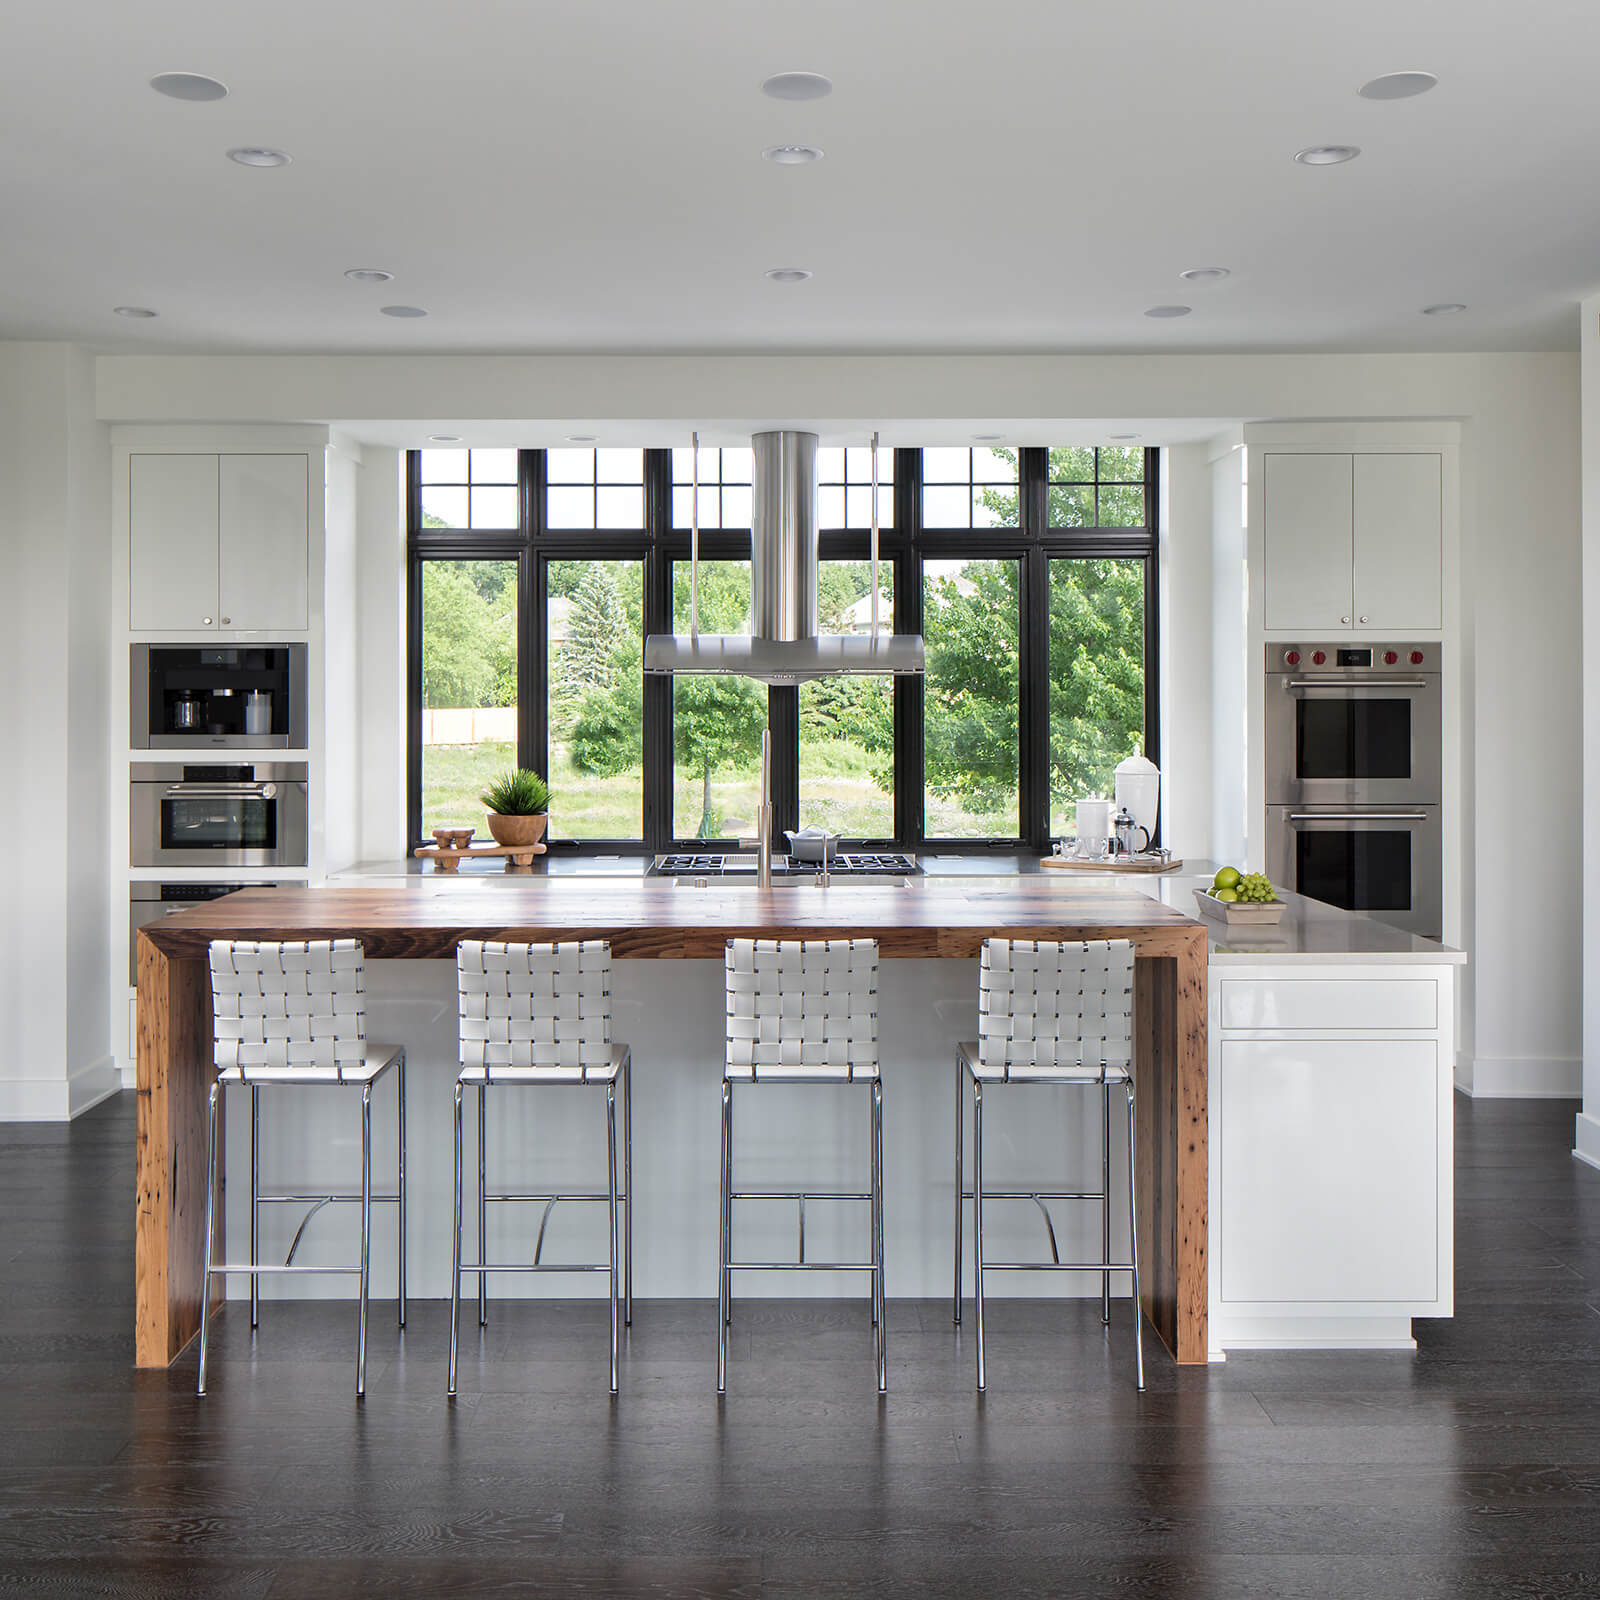 Large open concept kitchen with Marvin Signature Ultimate Casement Windows